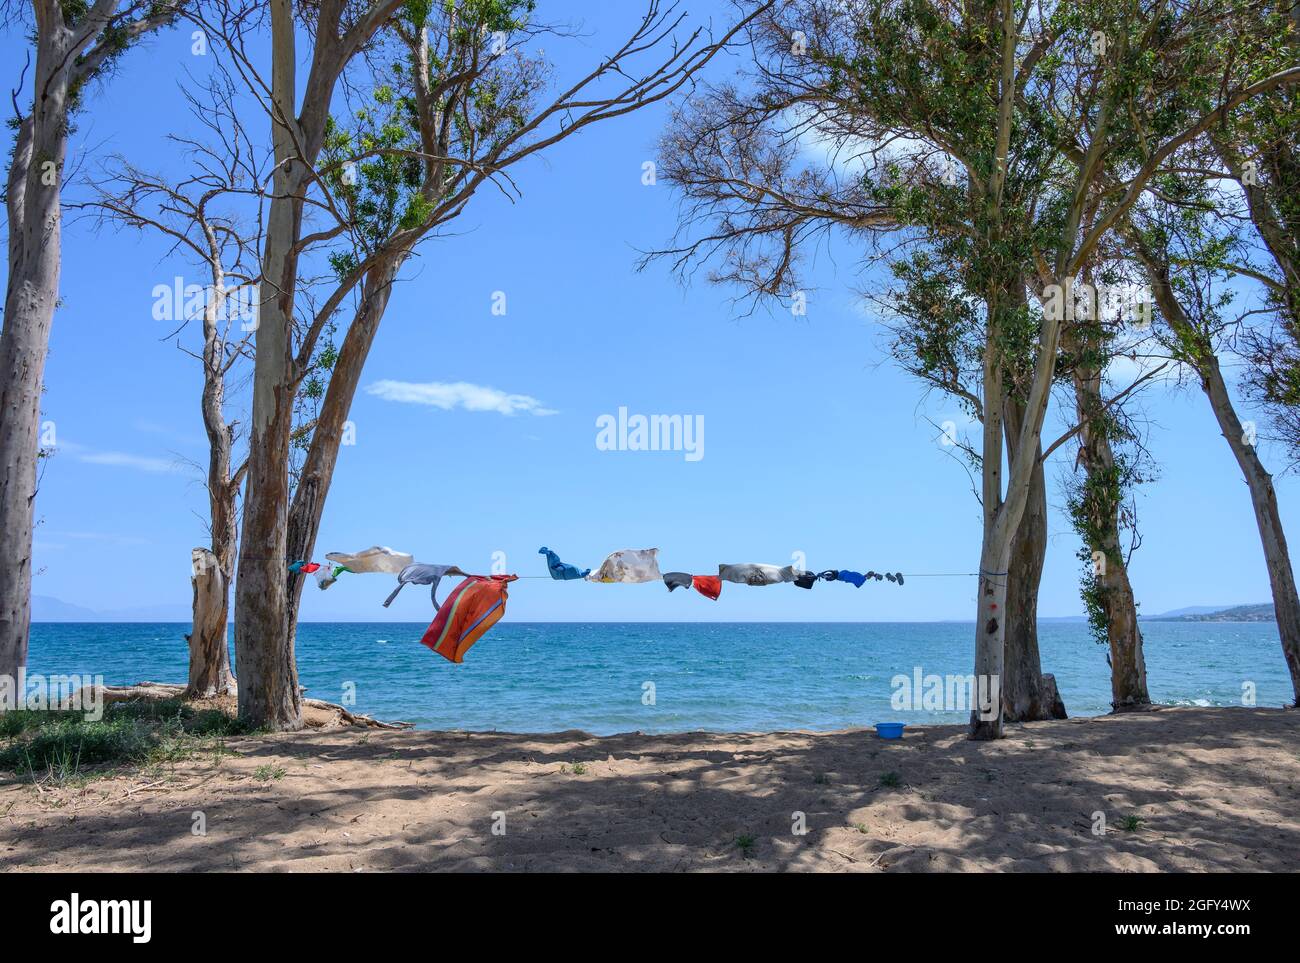 Campers clothes drying on a washing line, strung between trees, next to the sea on a beach in Southern Greece. Stock Photo